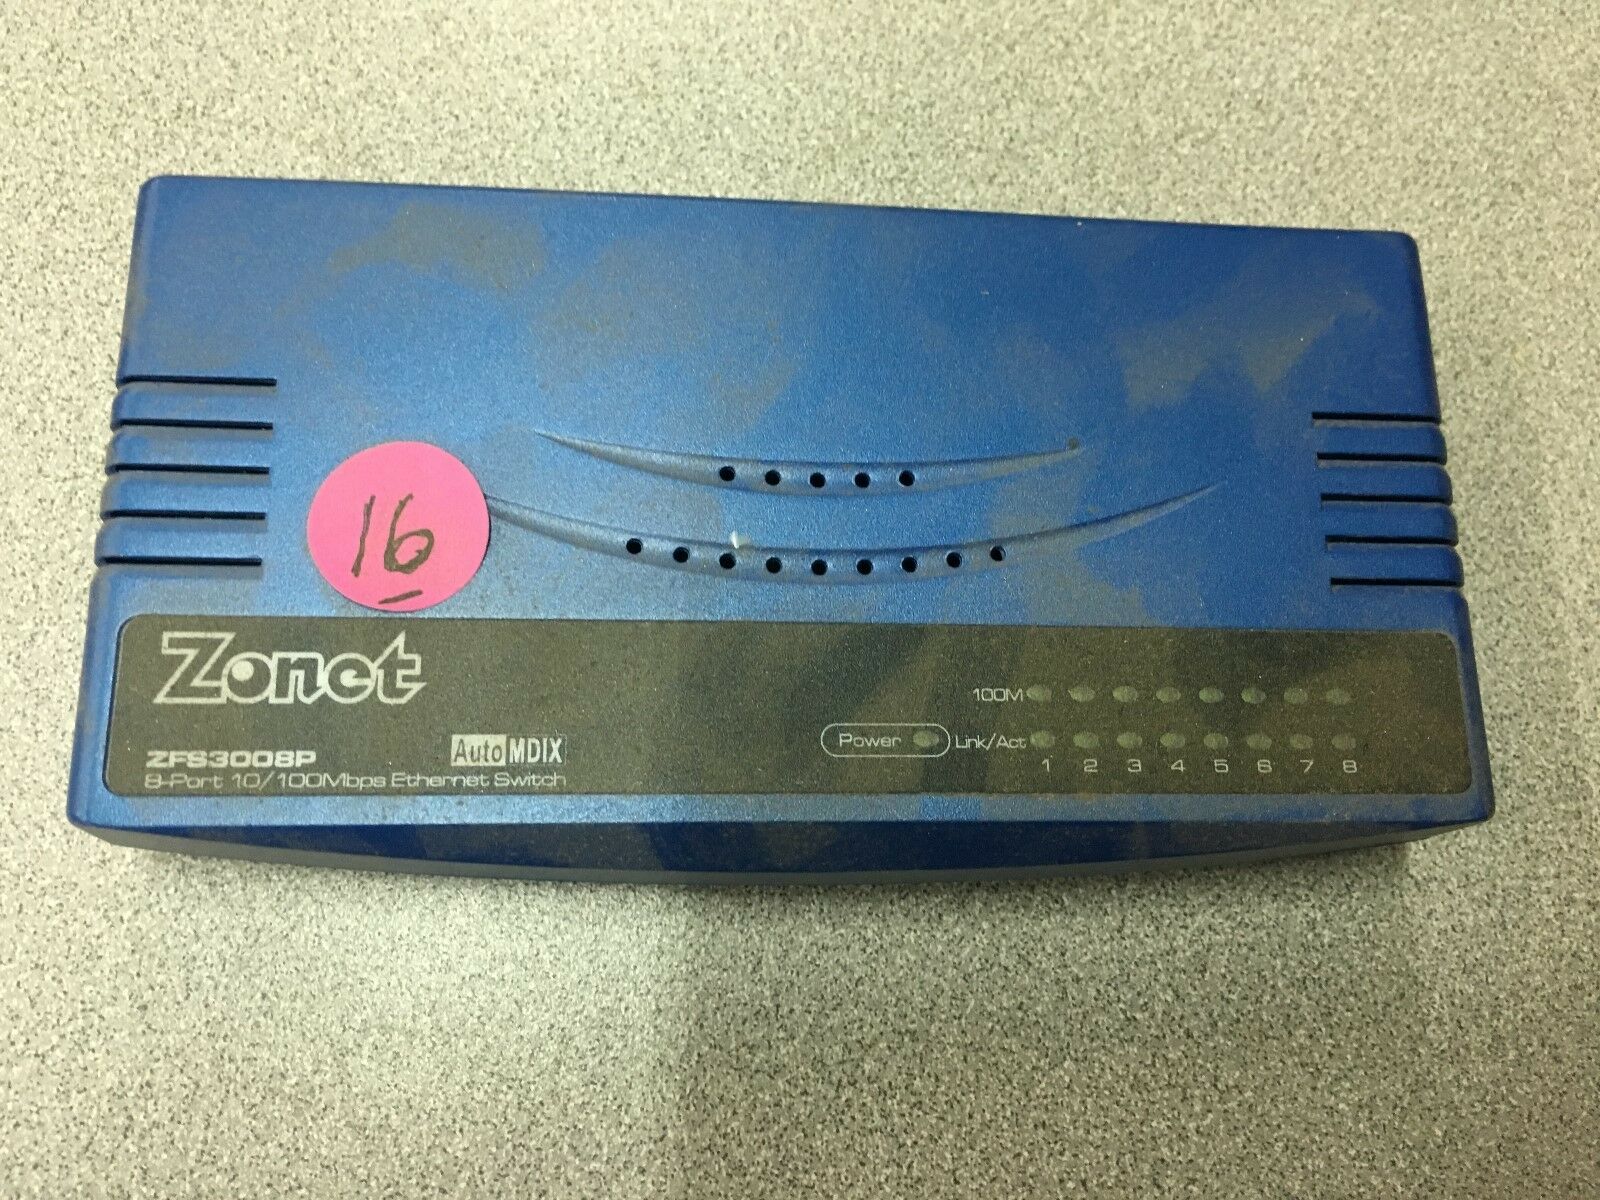 USED ZONET ETHERNET SWITCH 2FS3008P